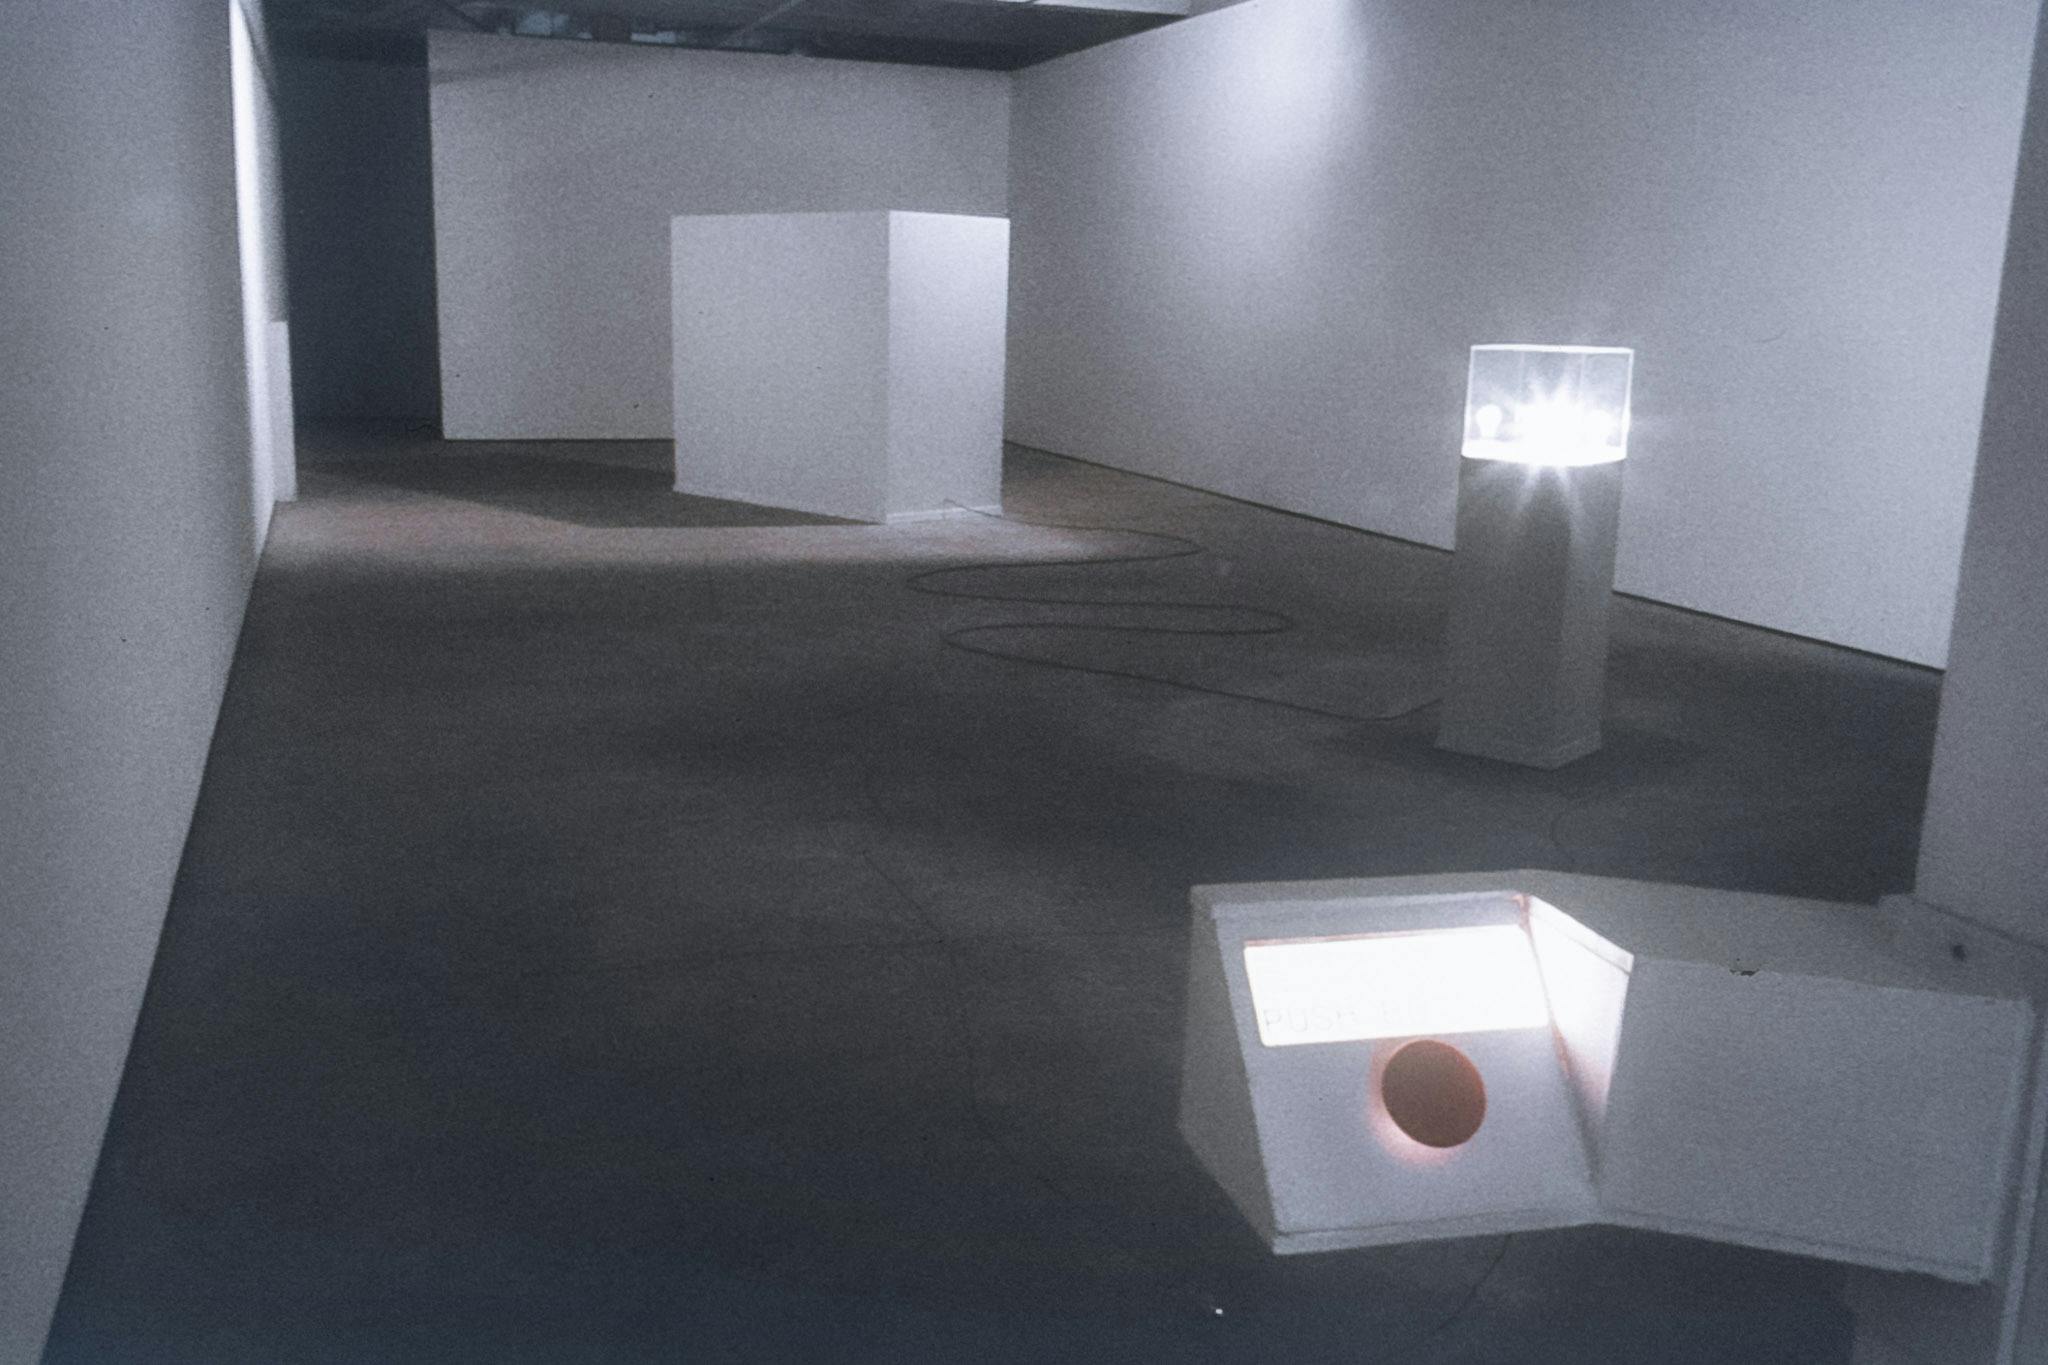 A gallery space with a button in its entryway, and two large white plinths. One plinth has a lightbulb in a glass case, and the other contains an artist, pedaling to power the lightbulb, unseen.